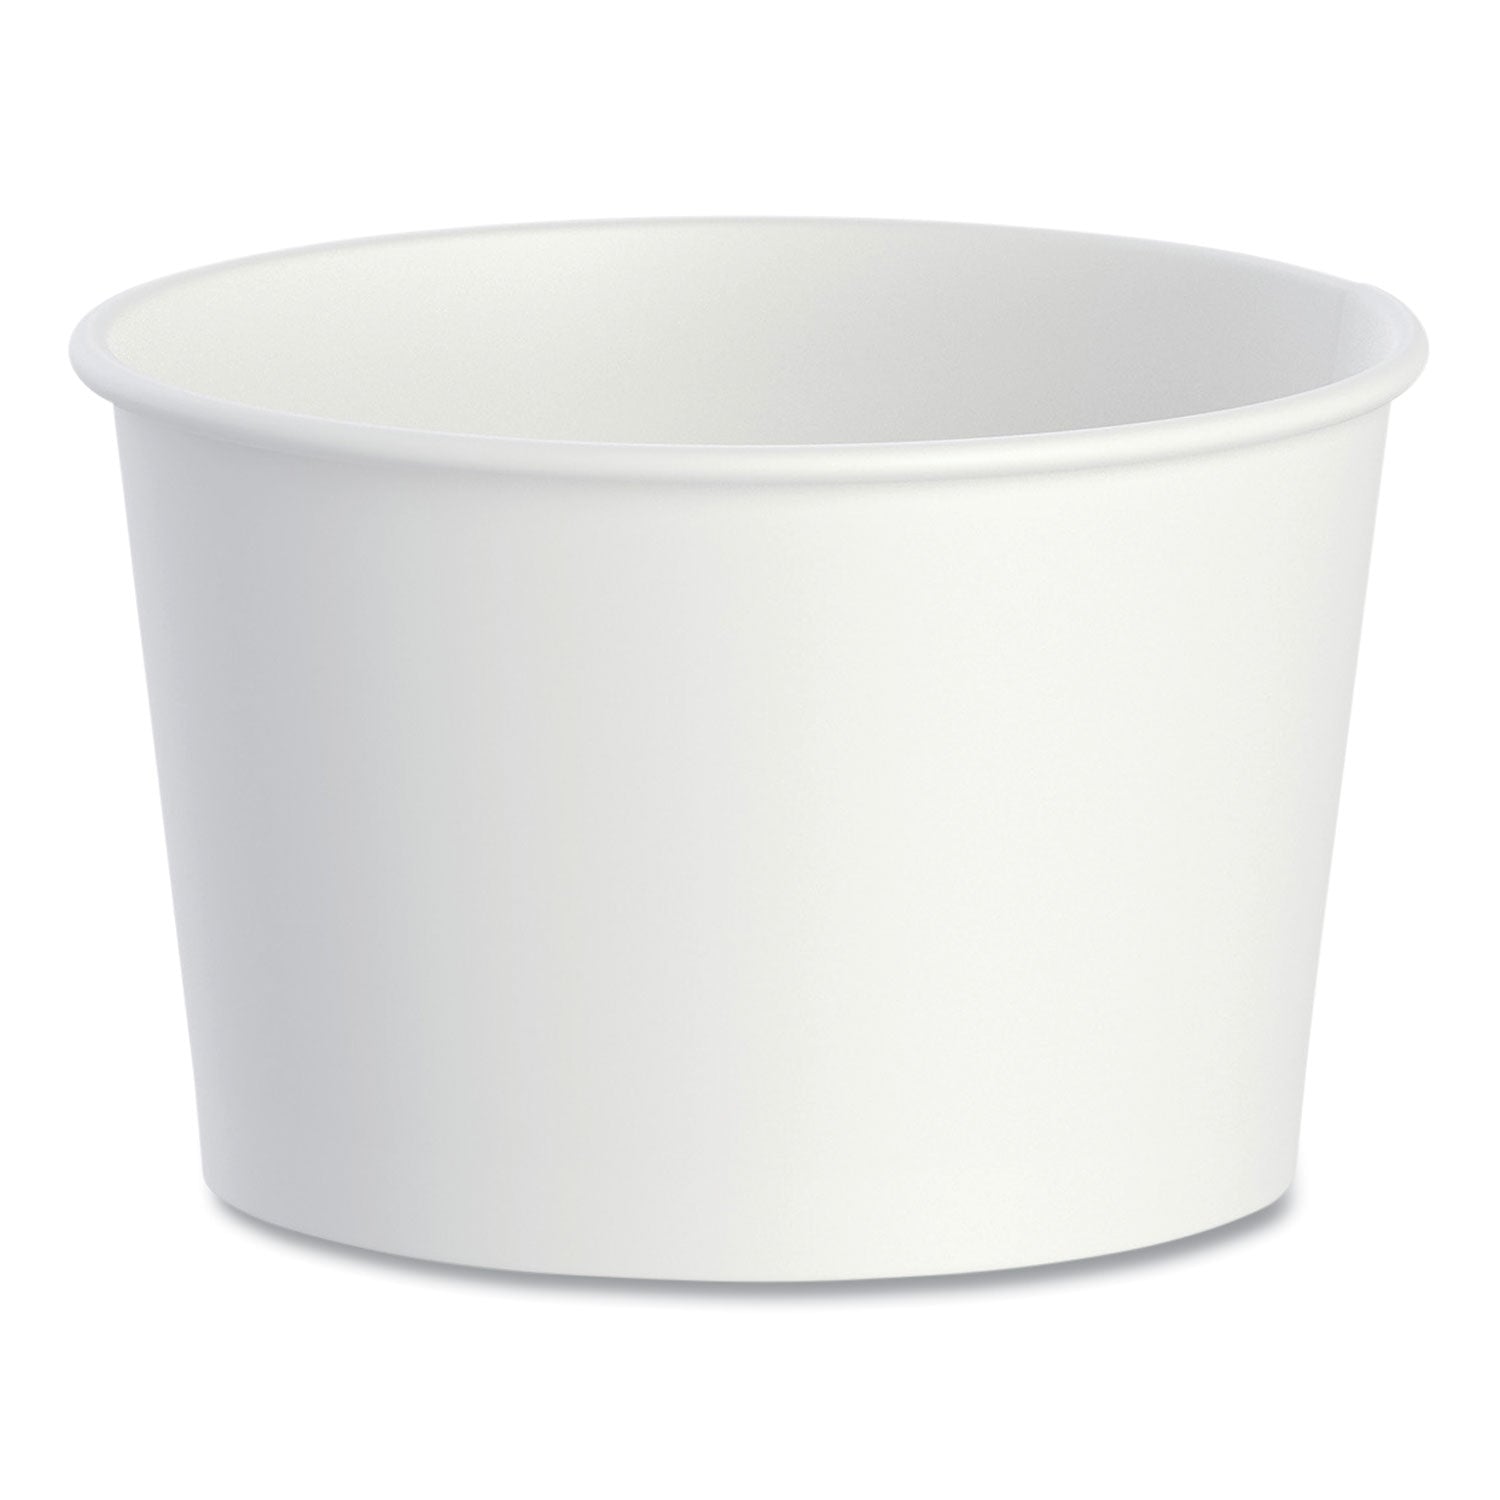 double-poly-paper-food-containers-8-oz-38-diameter-x-24h-white-50-pack-20-packs-carton_sccvs60802050 - 1